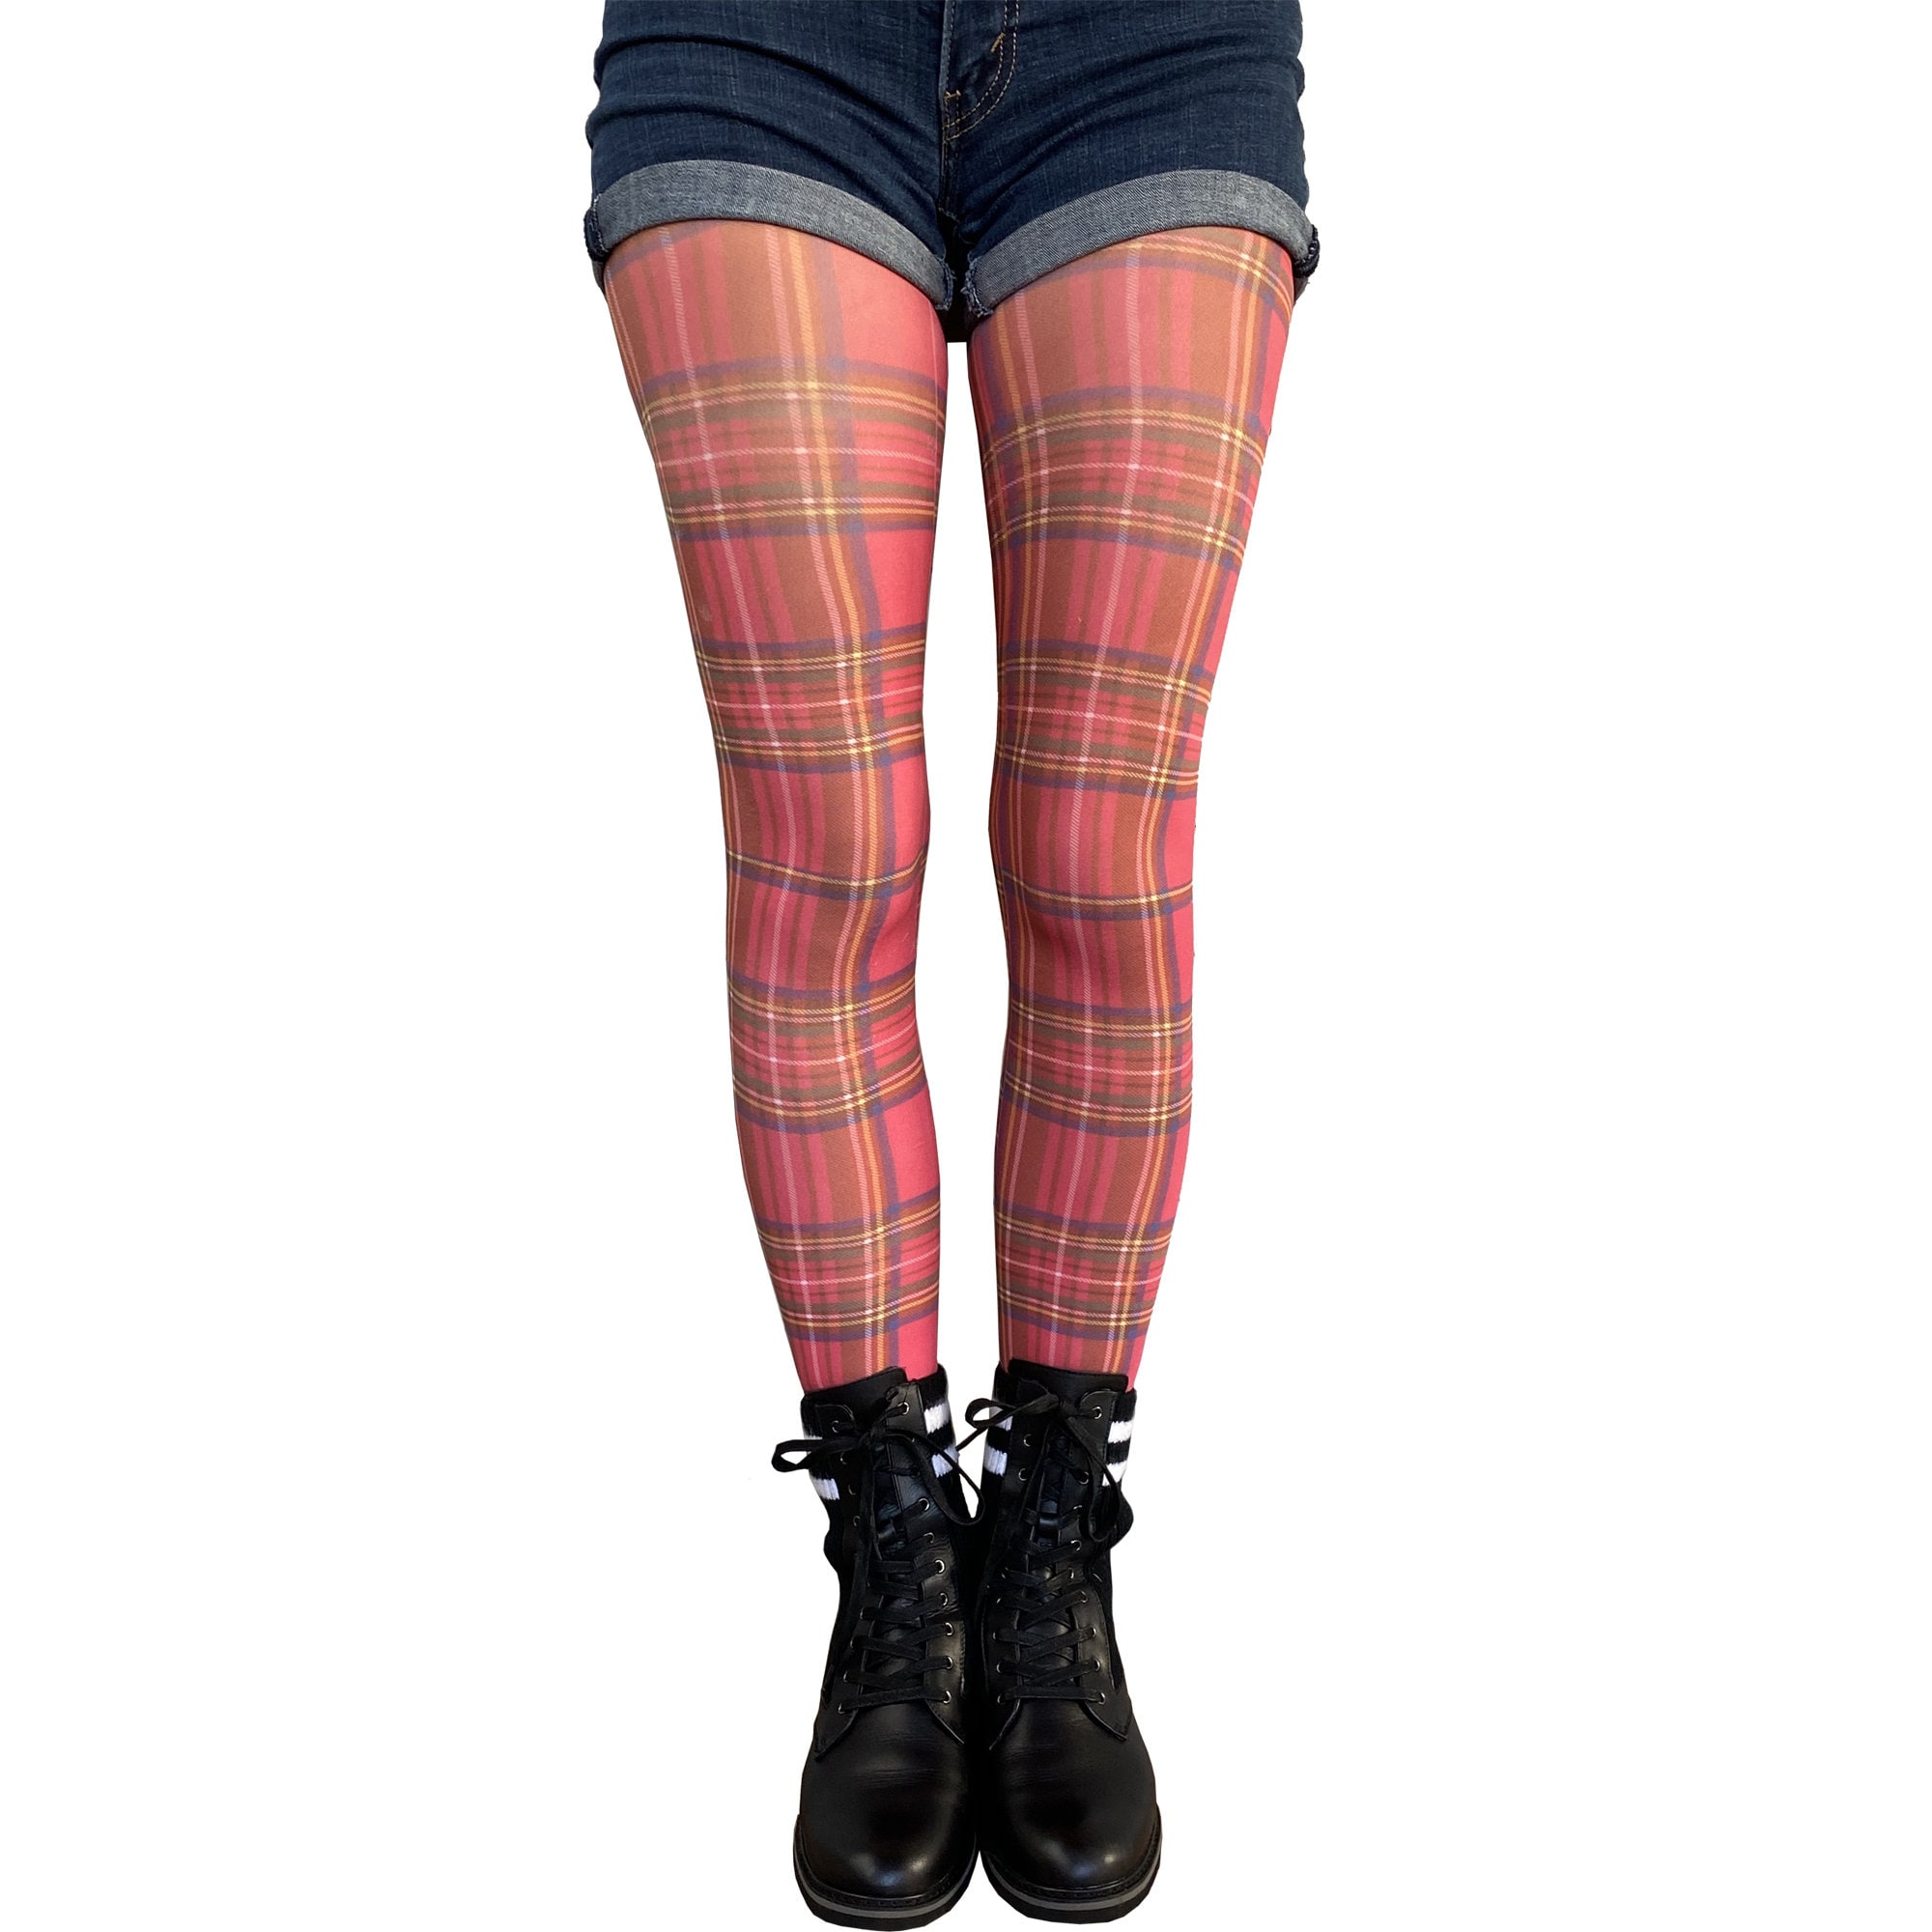 Red Plaid Tights Women's Opaque Patterned Pantyhose Available in Plus Size  Gift for Her 